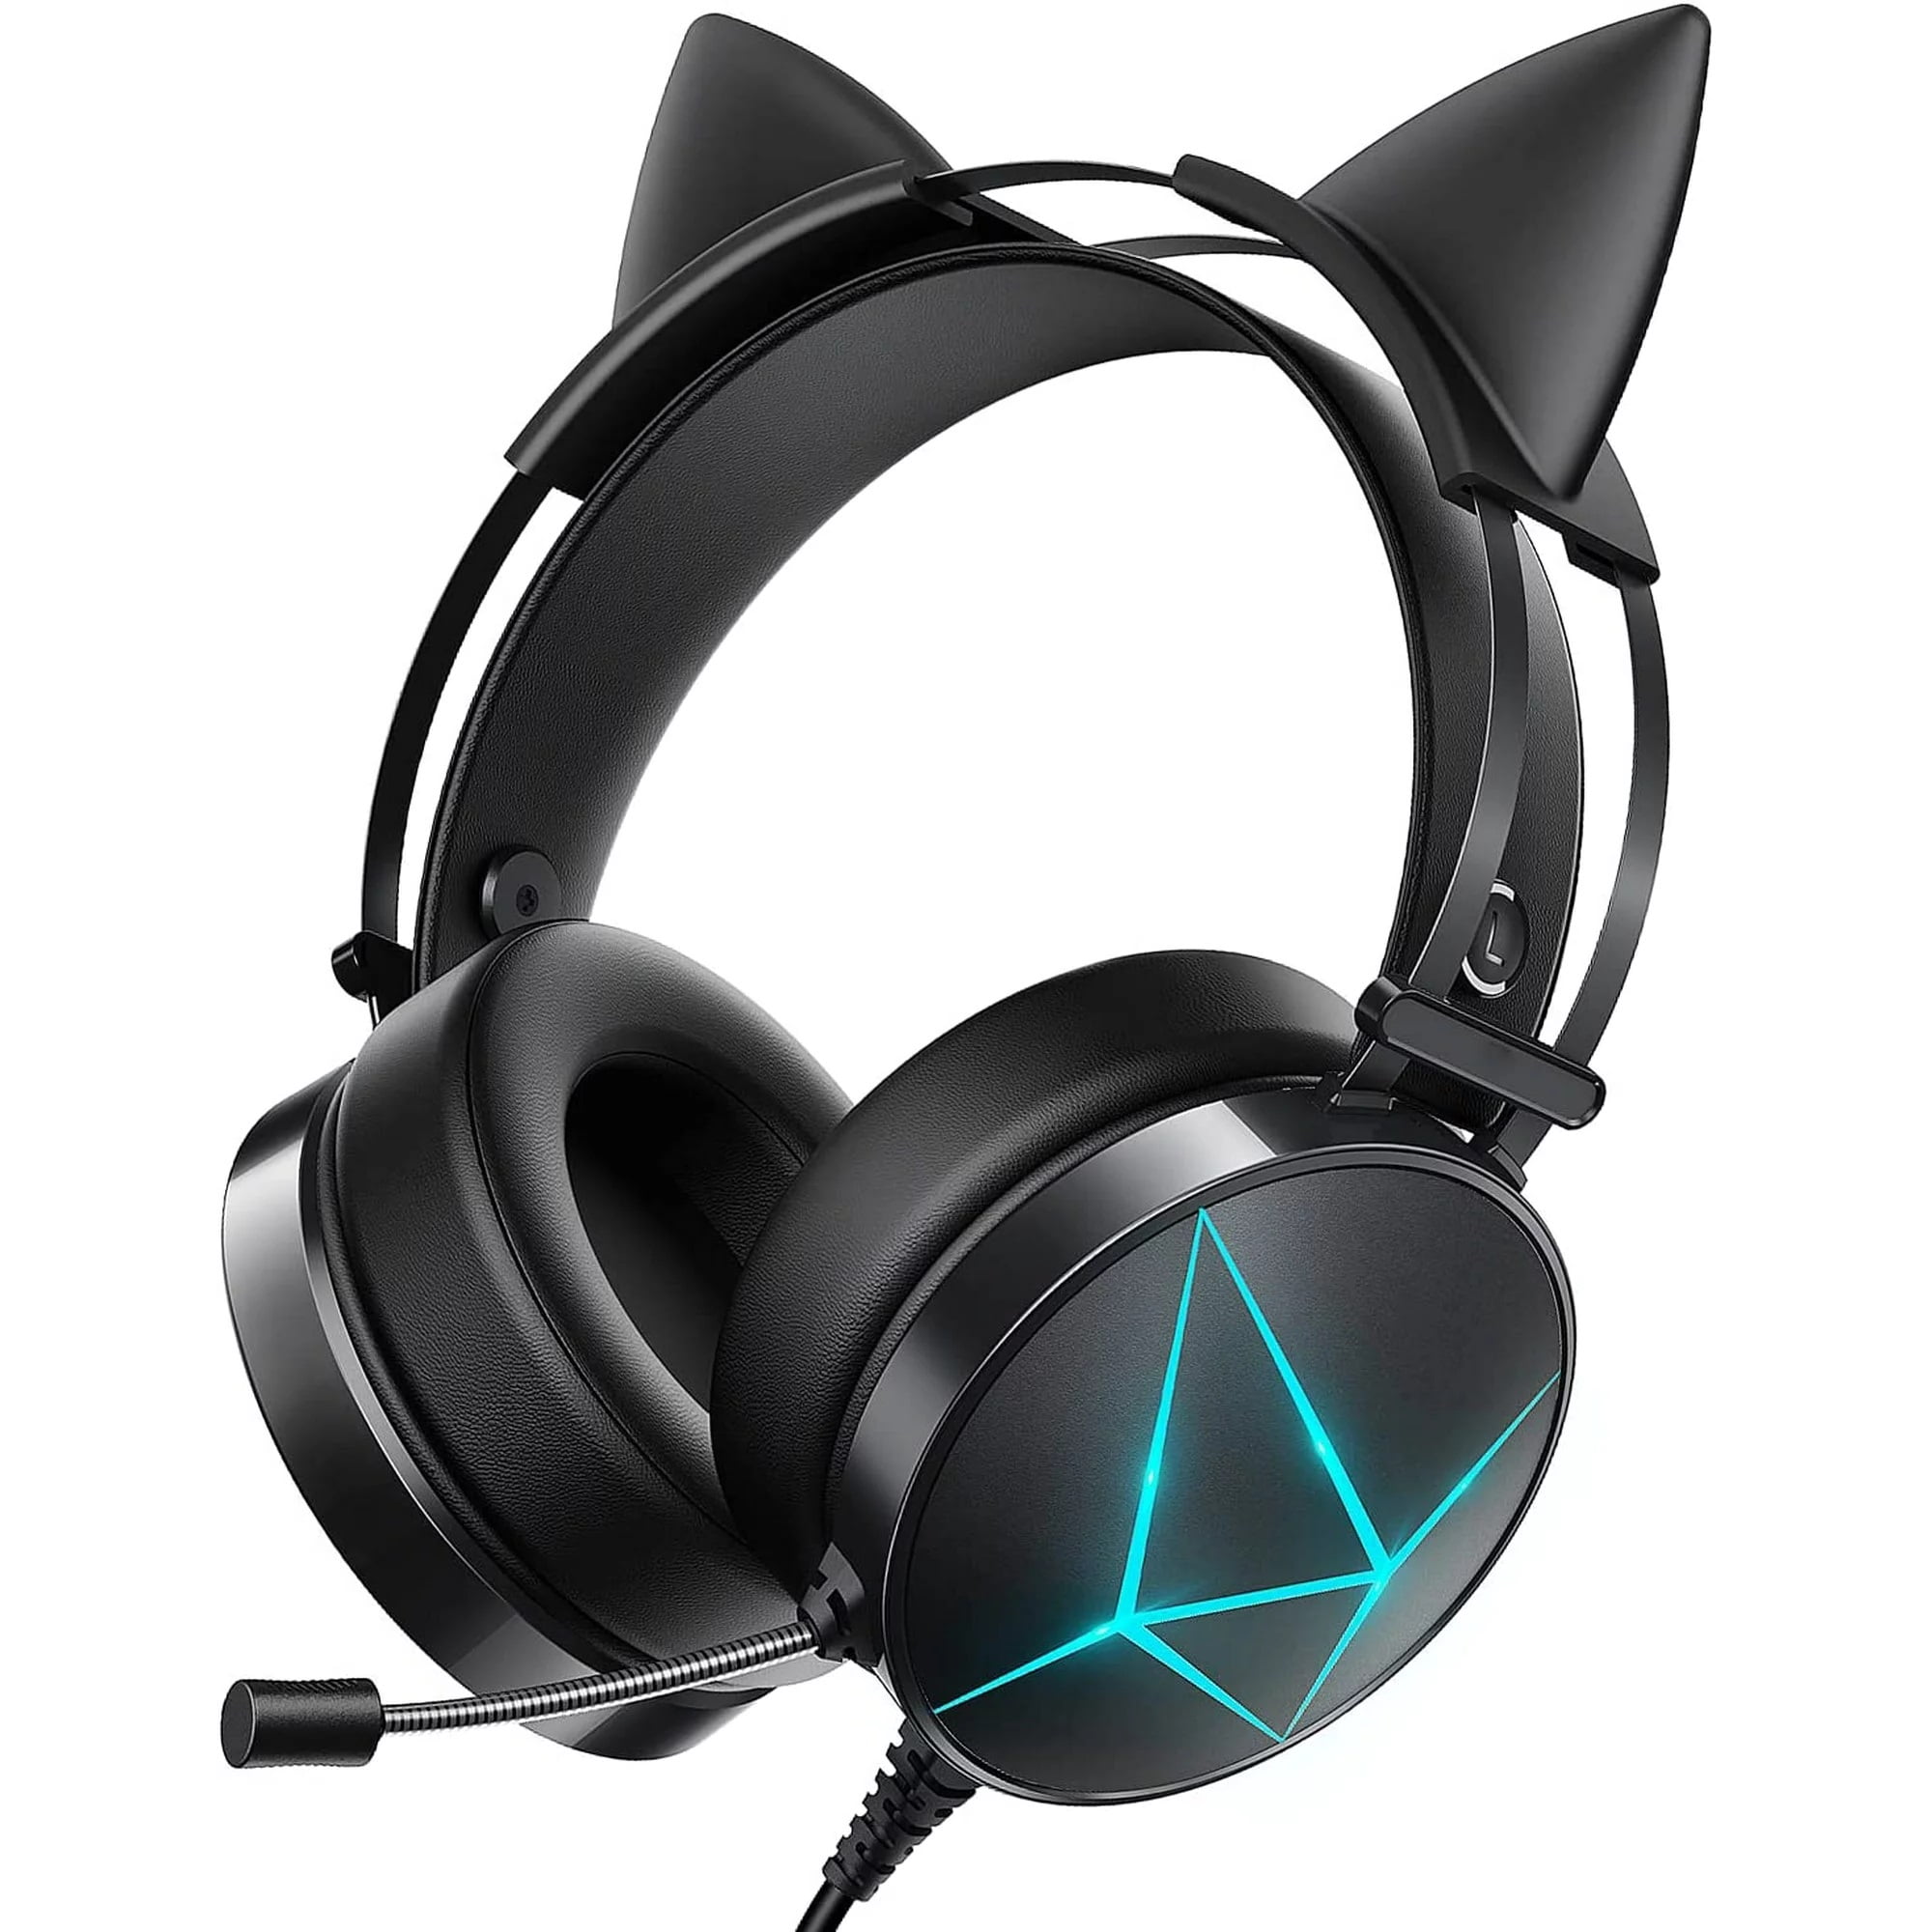 Logitech G432 Wired Gaming Headset, 7.1 Surround Sound, DTS Headphone:X  2.0, Flip-to-Mute Mic, PC (Leatherette) Black/Blue, 7.2 x 3.2 x 6.8 inches  : Video Games 